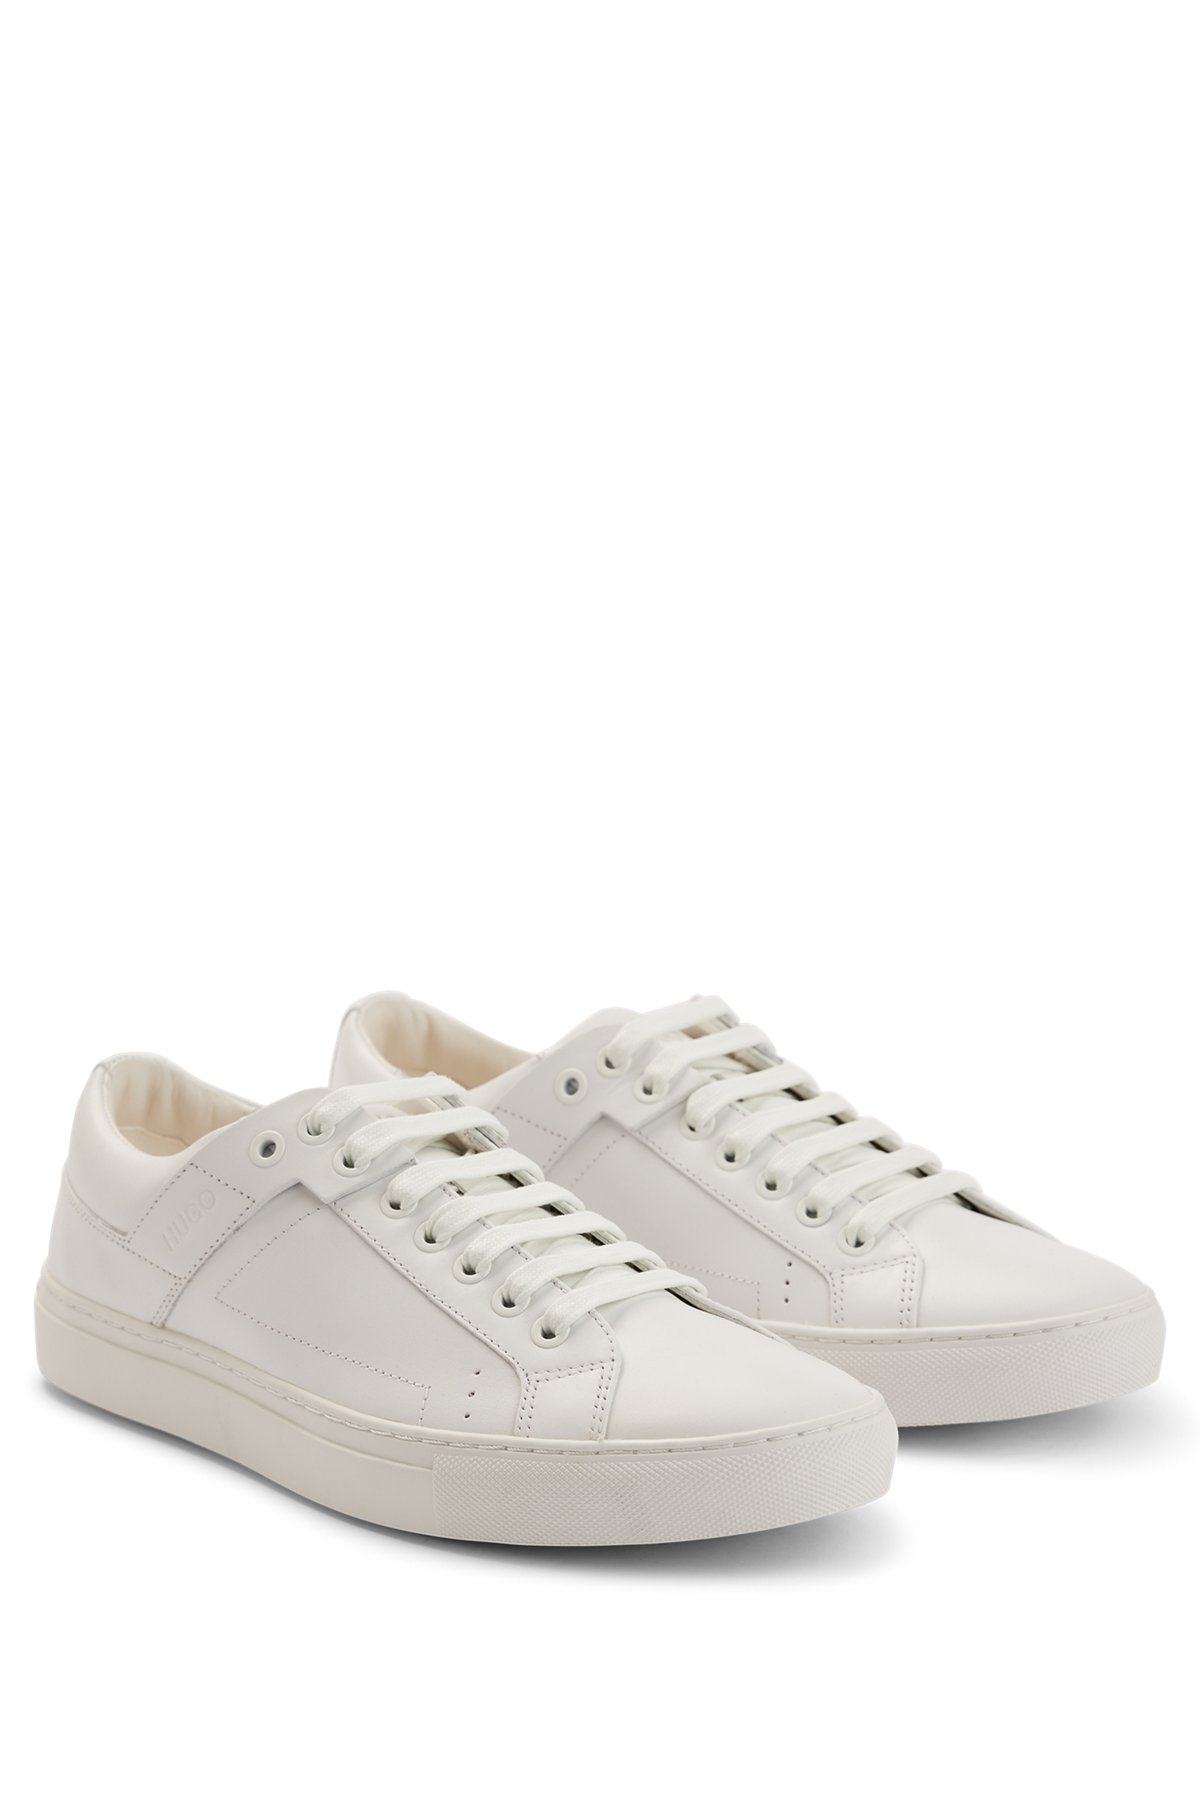 Tennis-inspired trainers in nappa leather with rubber sole, White